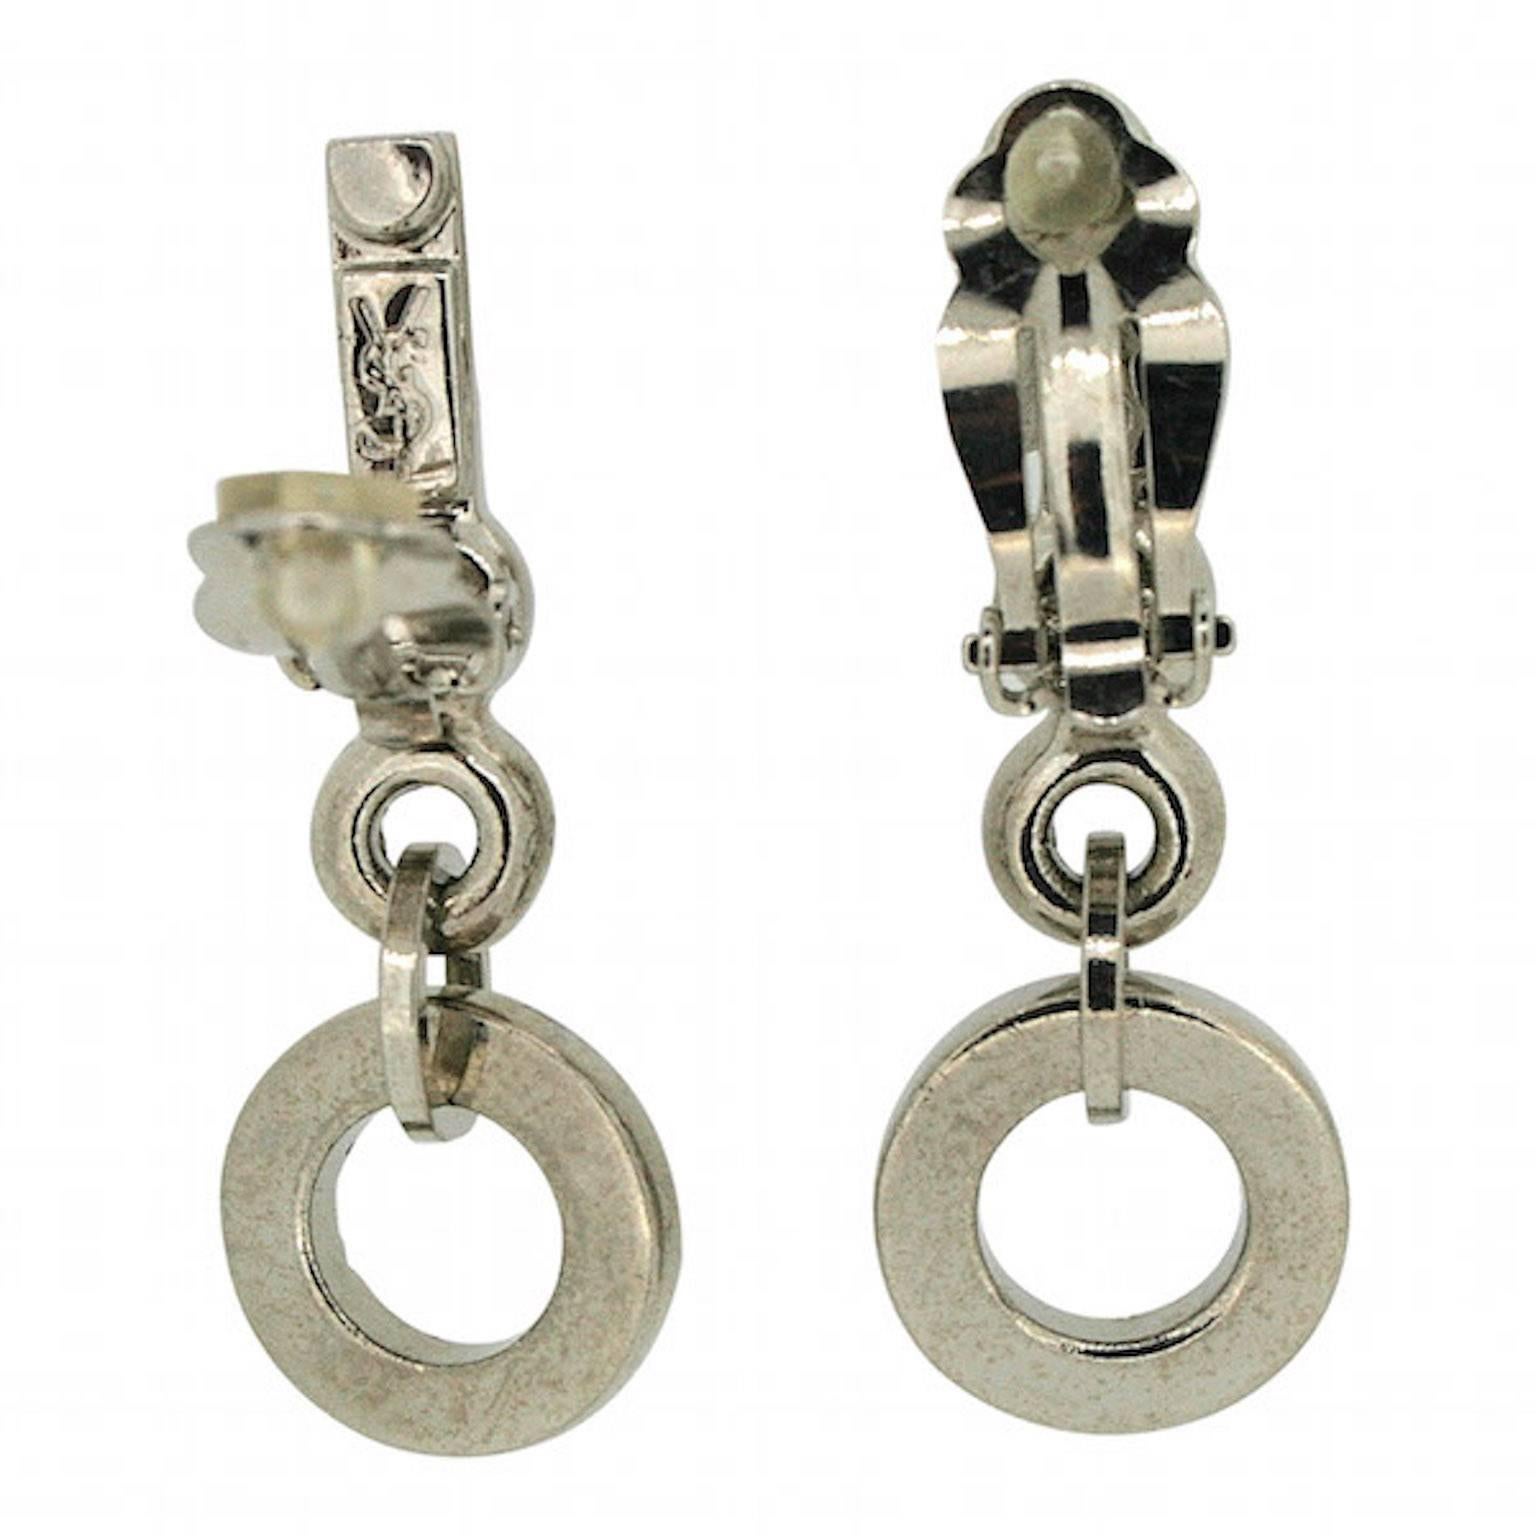 Magnificent and 'high fashion', these earrings are well-crafted example by Yves Saint Laurent. They date from the 1980s and are clip on.
Condition Report:
Excellent

The Details...
These silver tone metal earrings feature an Art Deco style design.